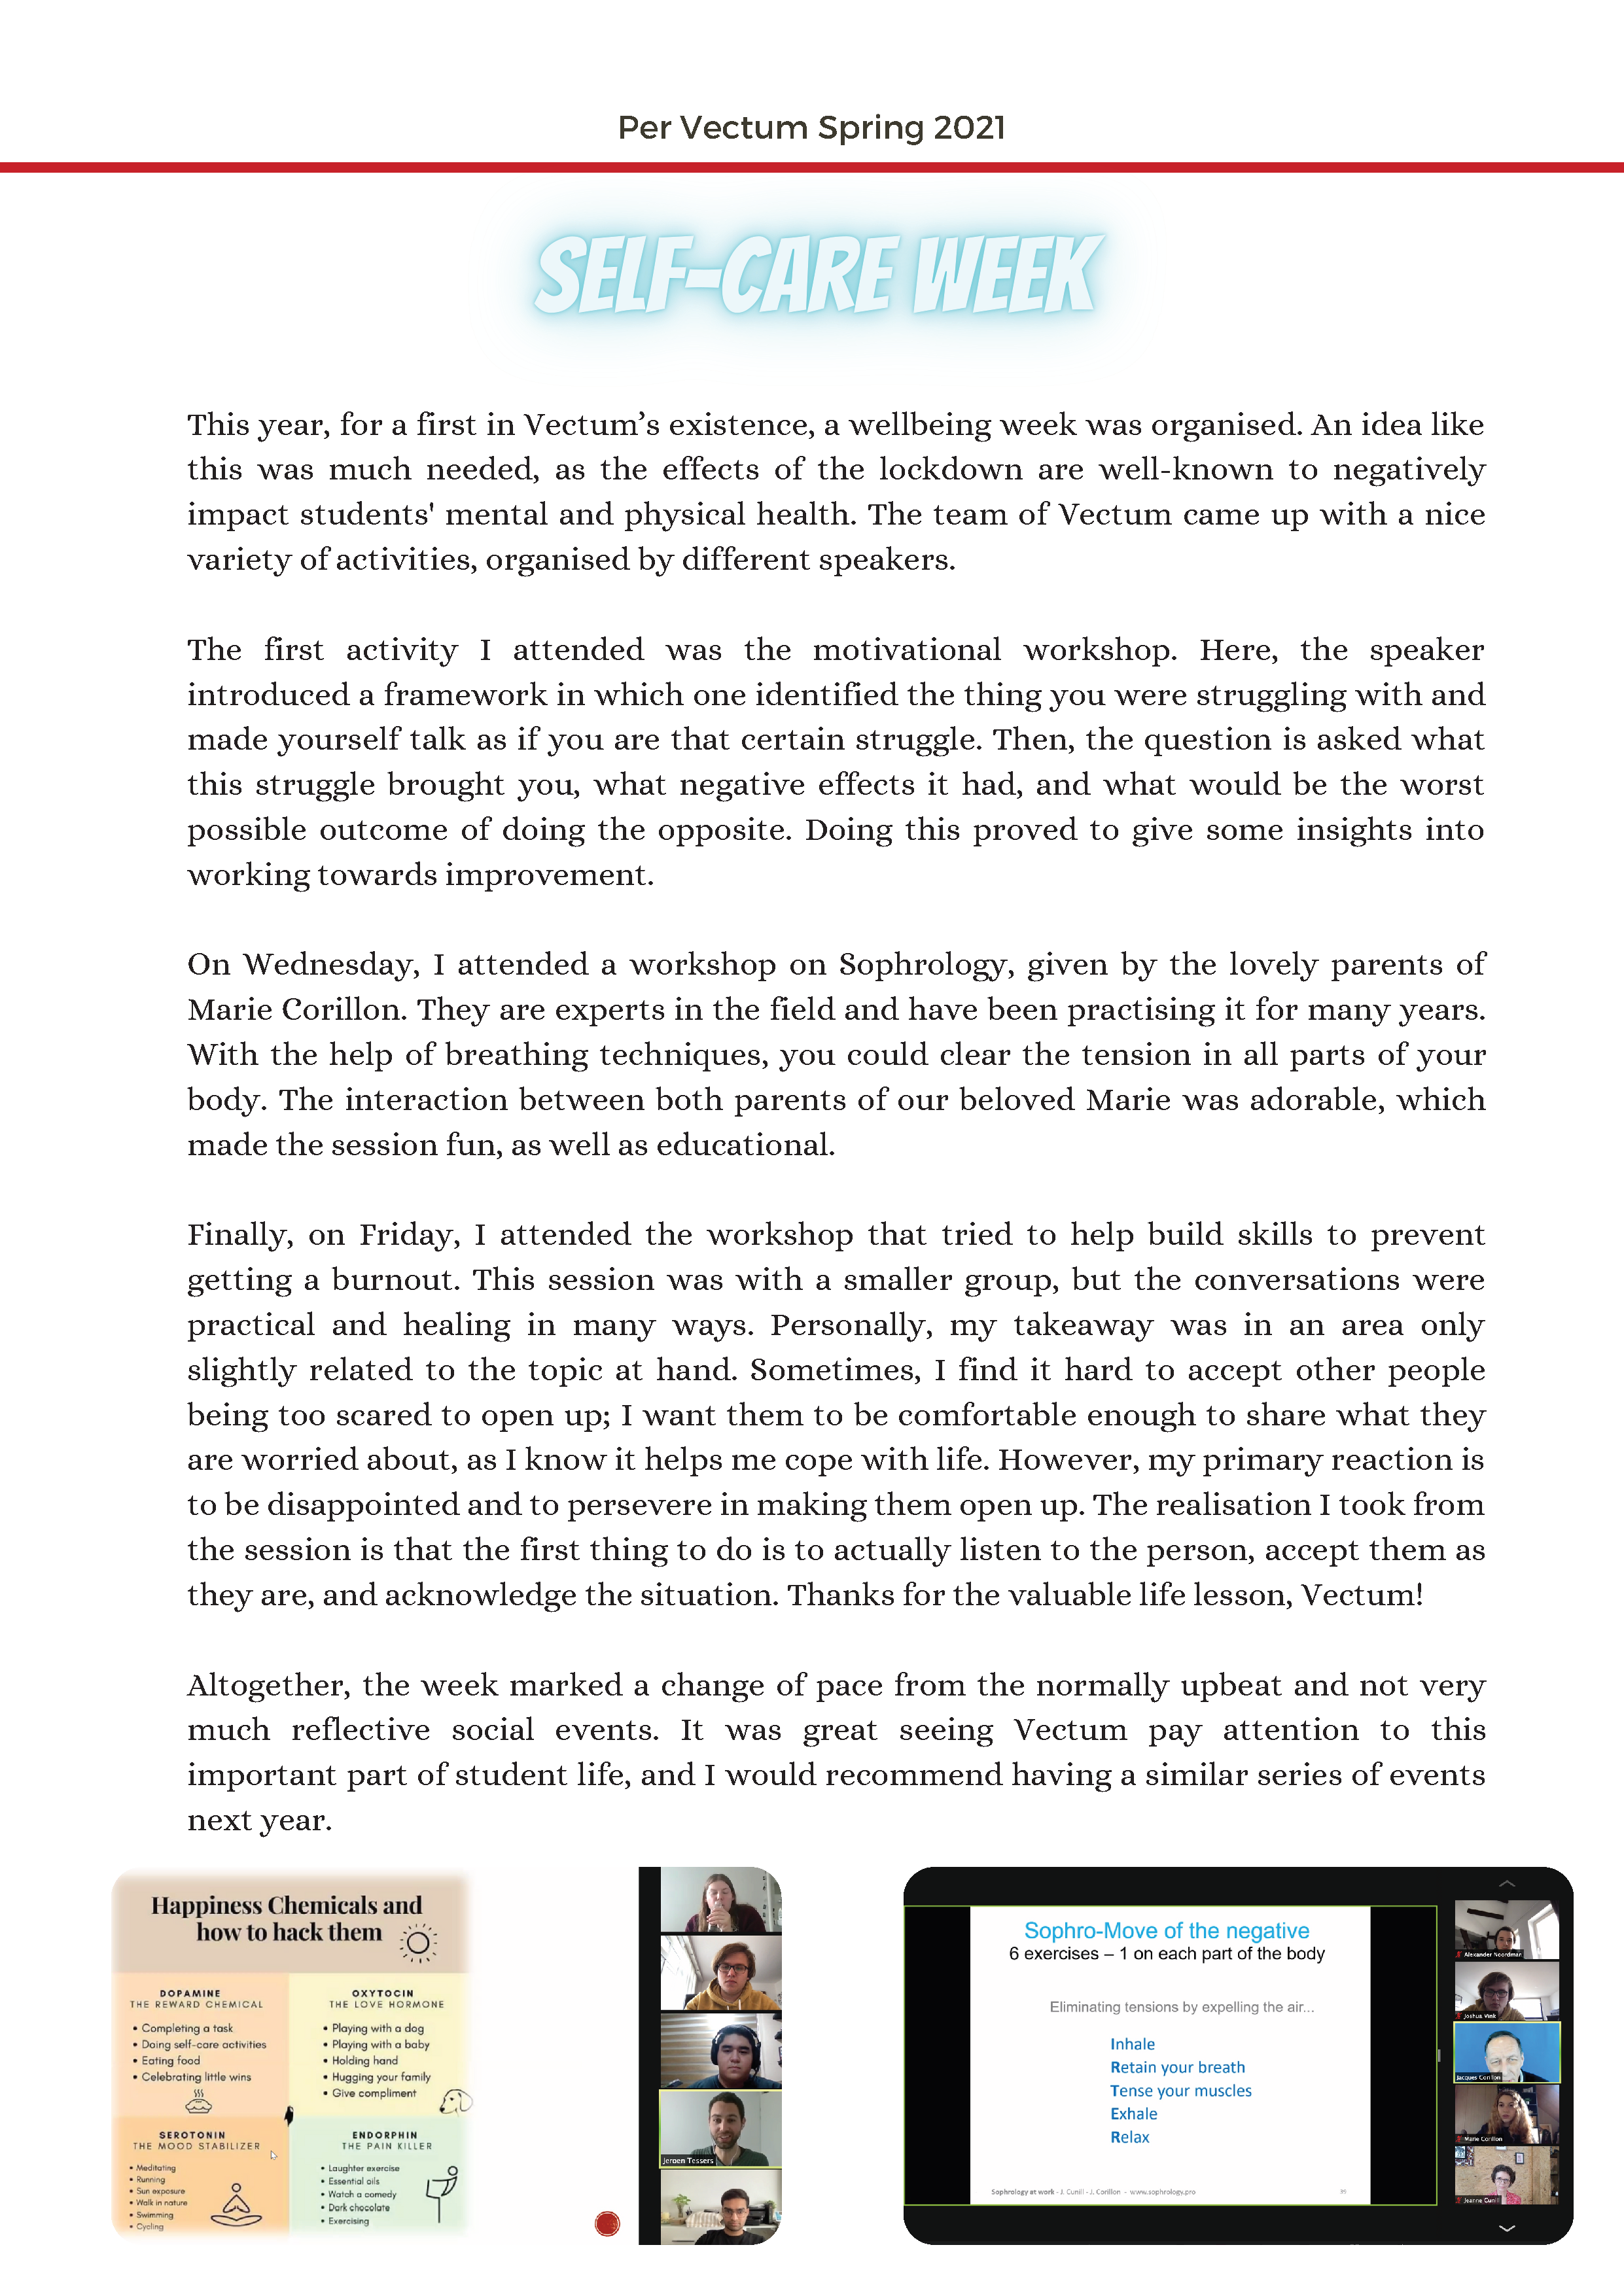 Per Vectum Spring edition 2021 (1)_Page_10.png